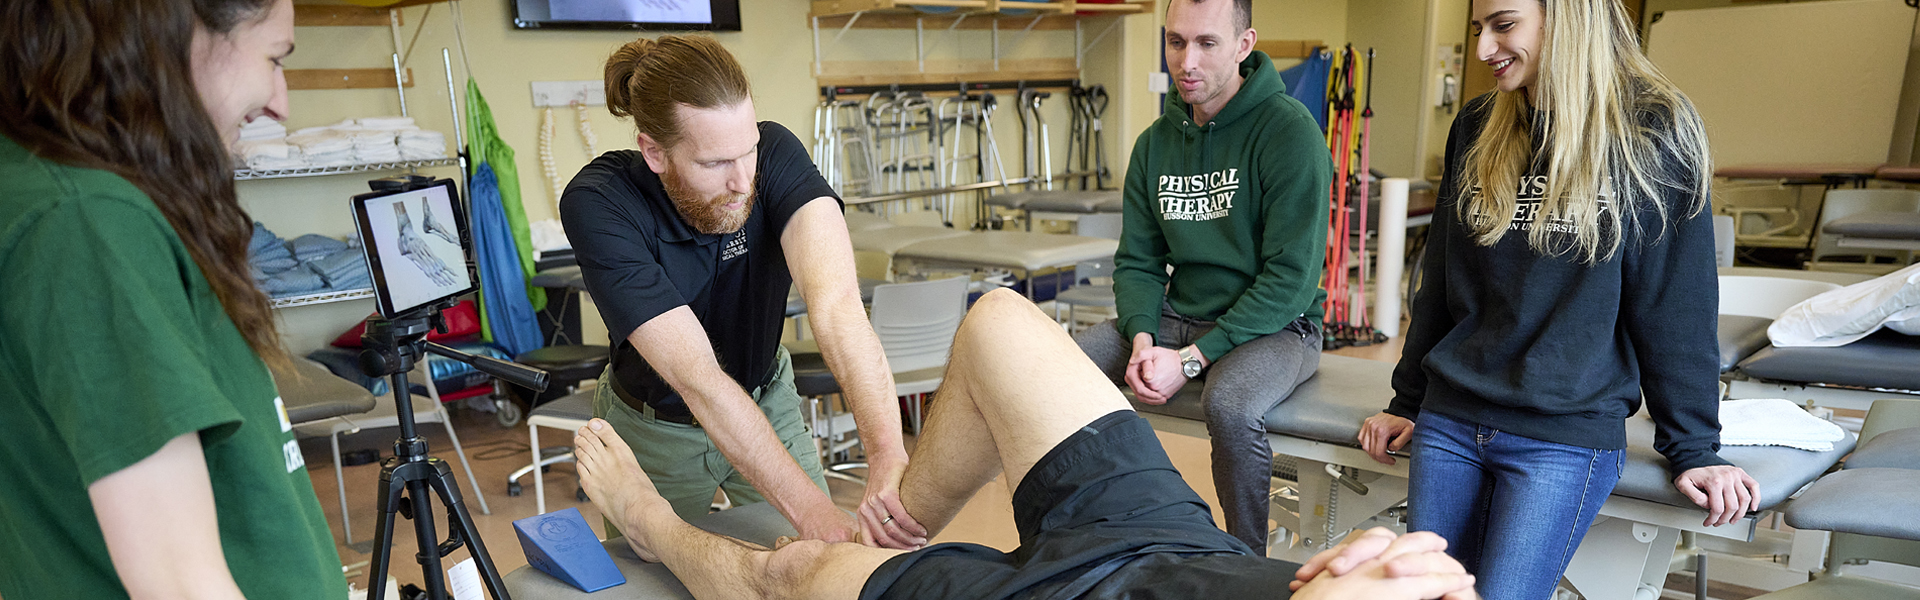 A faculty member works with students in a physical therapy lab